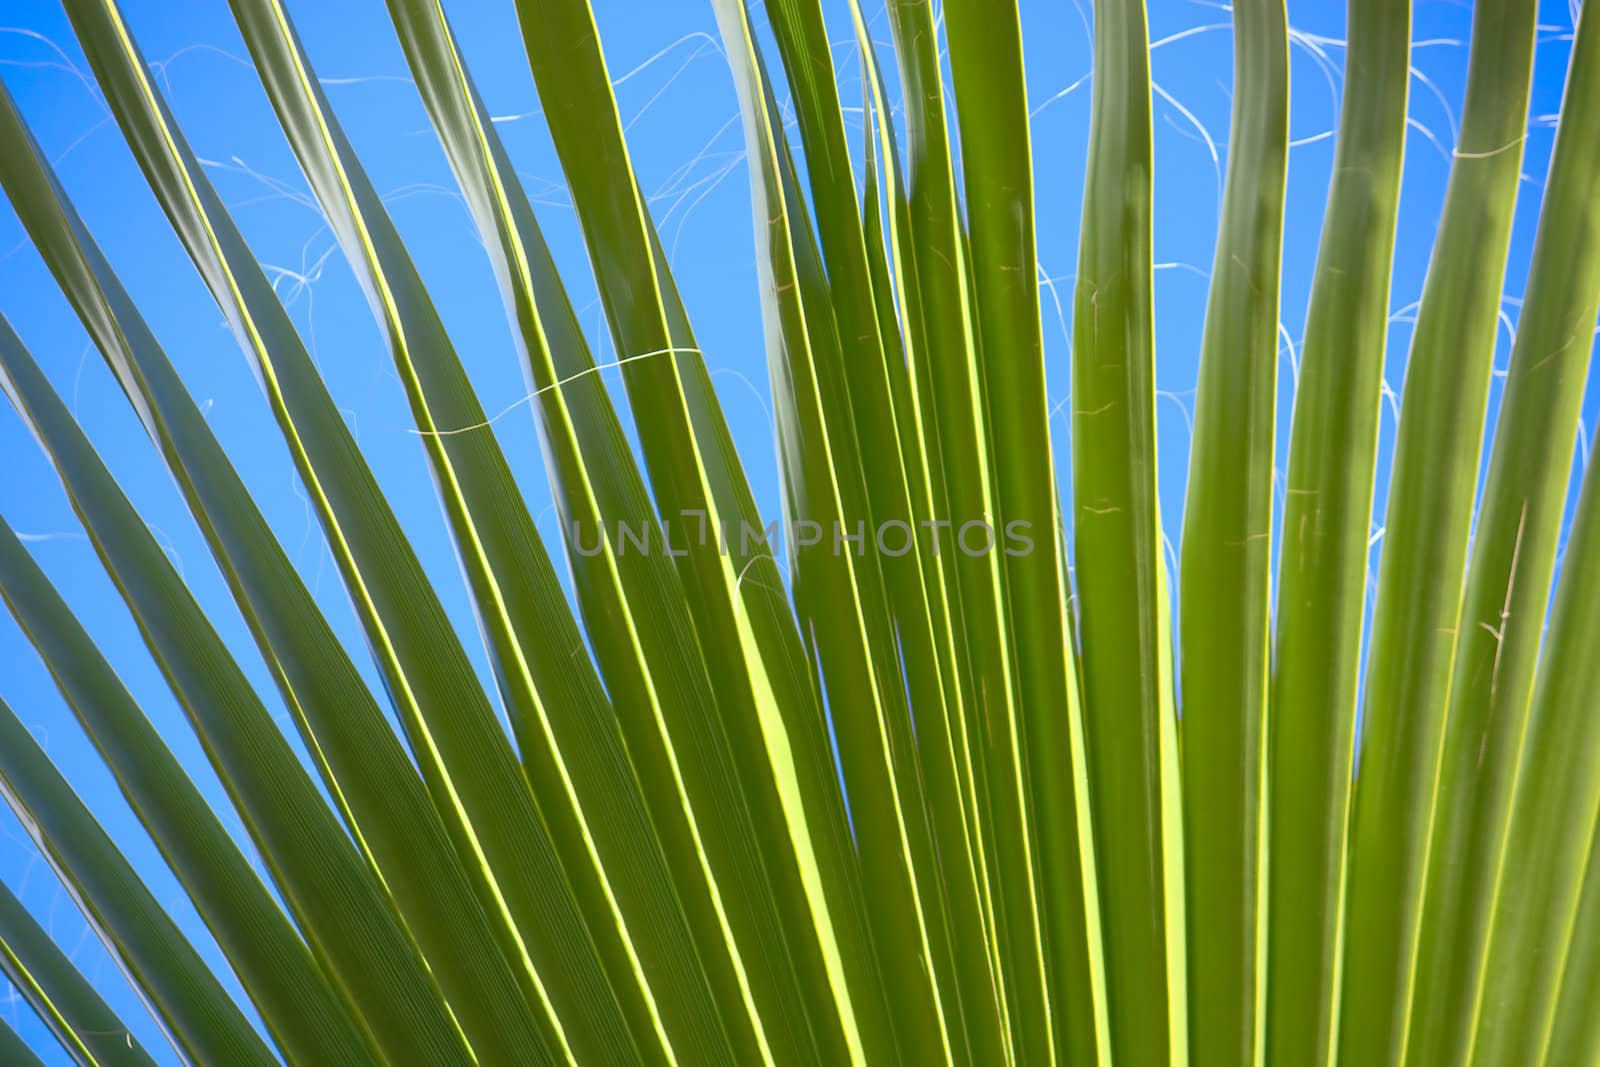 Blue sky through the leaves of palm trees.